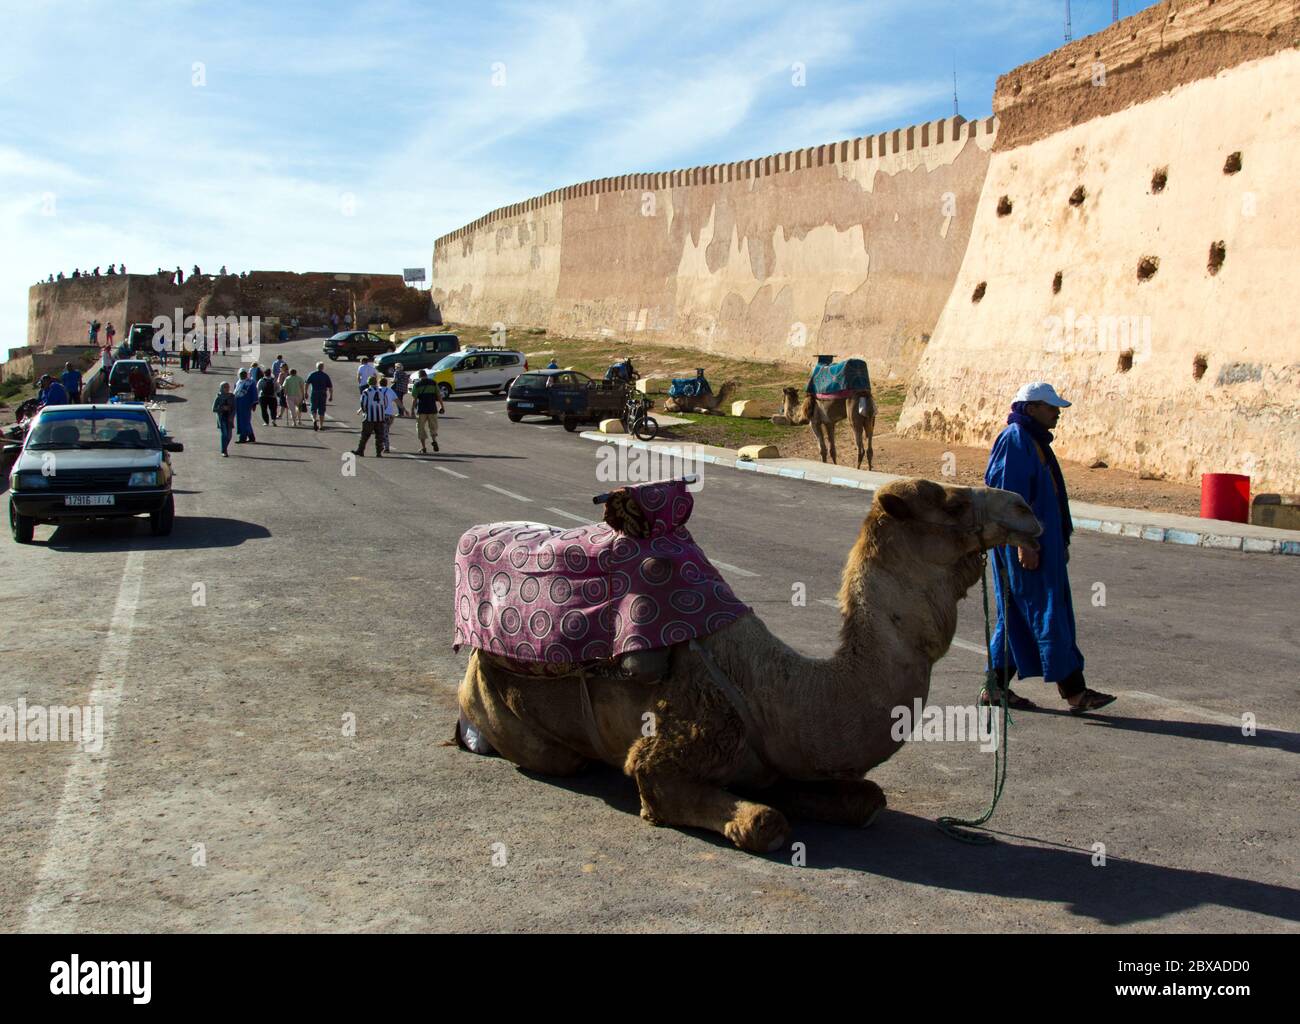 Riding Camel in front of the old fortress, the Kasbah, above the city of Agadir, Morocco Stock Photo